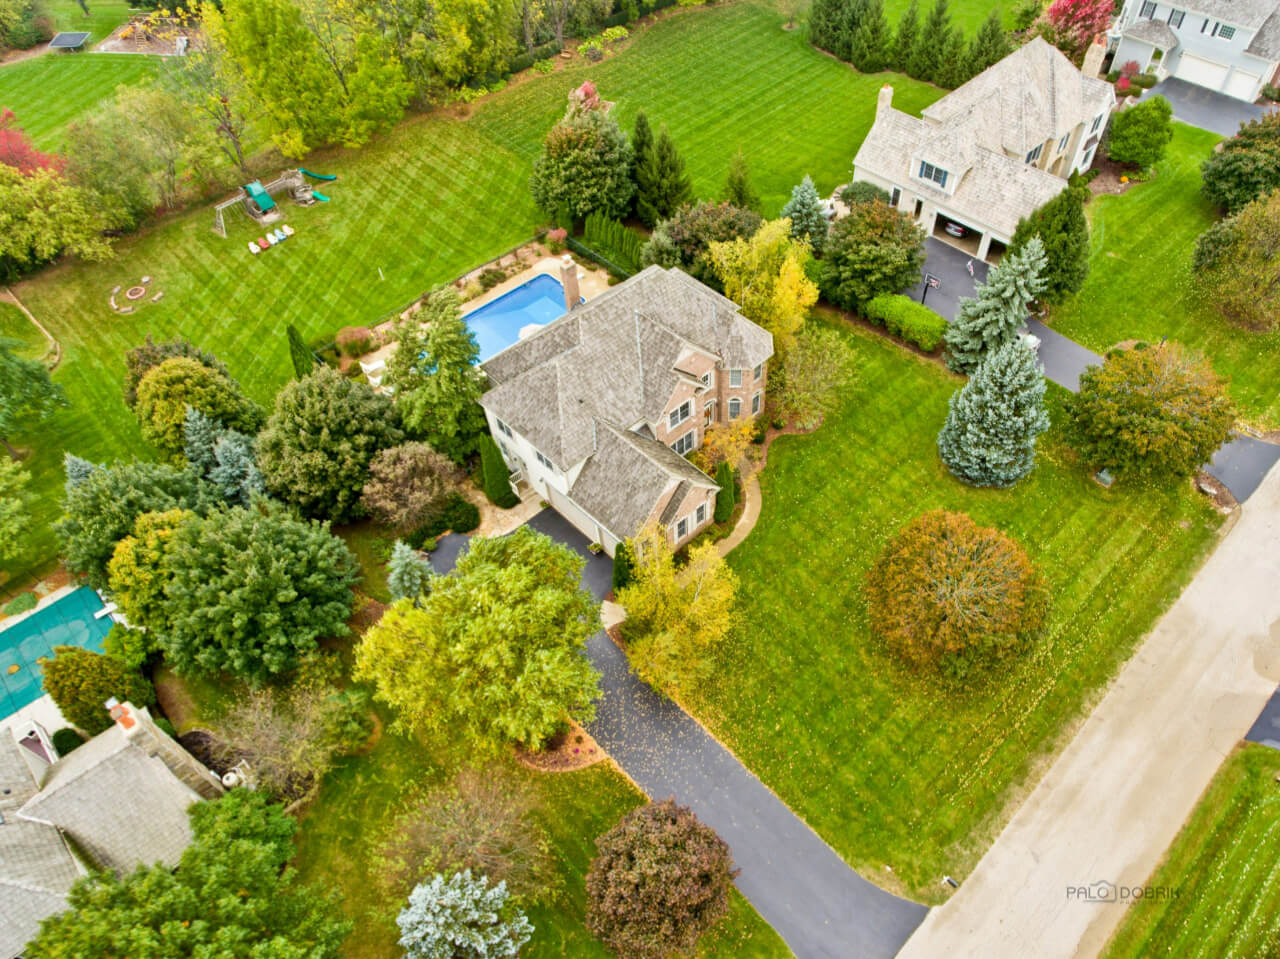 Top aerial view of the property